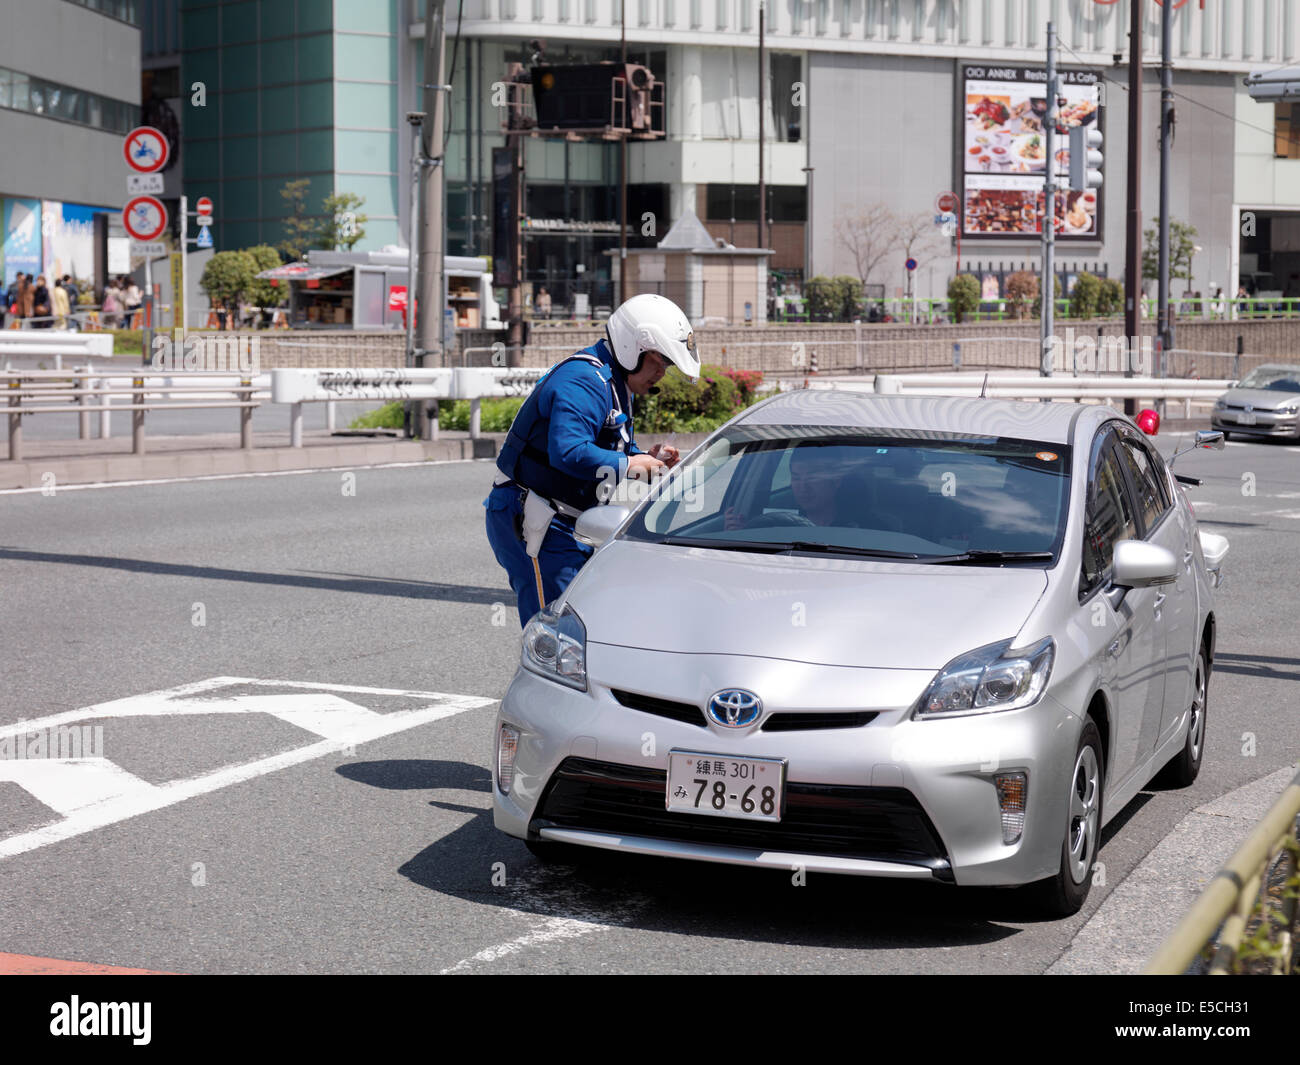 Police officer checking a drivers license of a driver in a stopped car. Tokyo, Japan. Stock Photo